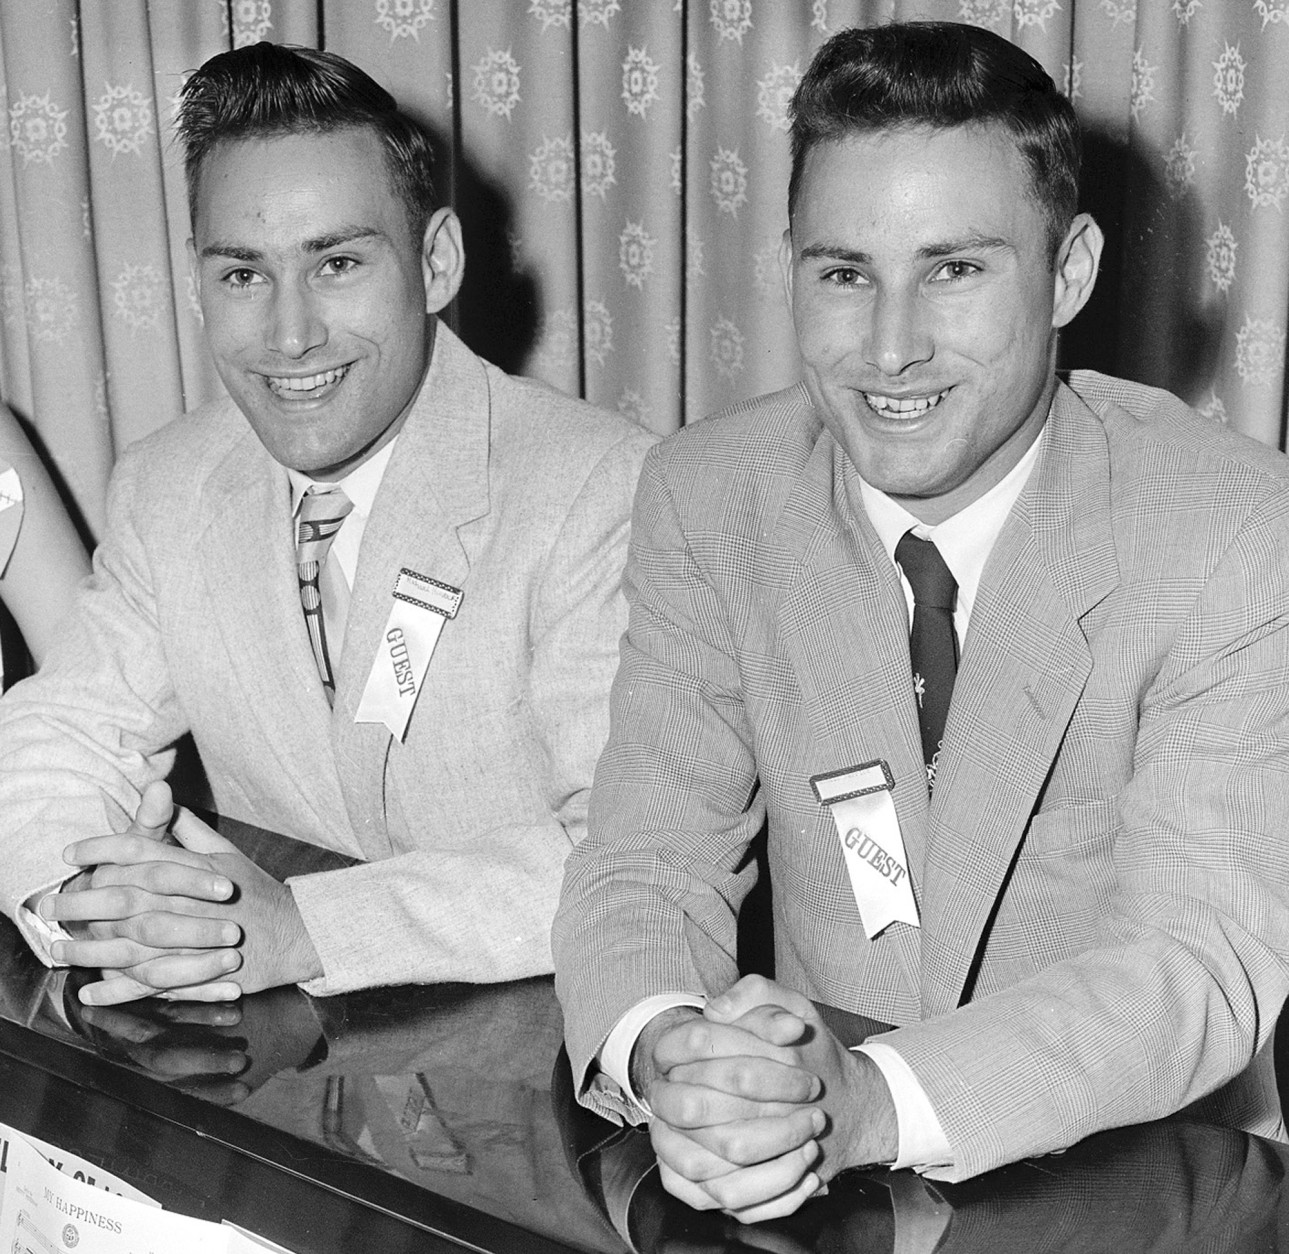 FILE - In this June 4, 1955 file photo, Richard Herrick, left, and his twin brother Ronald, from Northborough, Mass., sing at the annual meeting of the Mended Hearts Club at a hotel in Boston. The identical twin brothers made medical history when Ronald donated one of his kidneys to Richard for a Dec. 23, 1954 kidney transplant that was recognized as the world's first successful organ transplant. Richard lived eight years after receiving the transplant.  Ronald died Monday, Dec. 27, 2010, in Augusta, Maine. He was 79. (AP Photo/File)